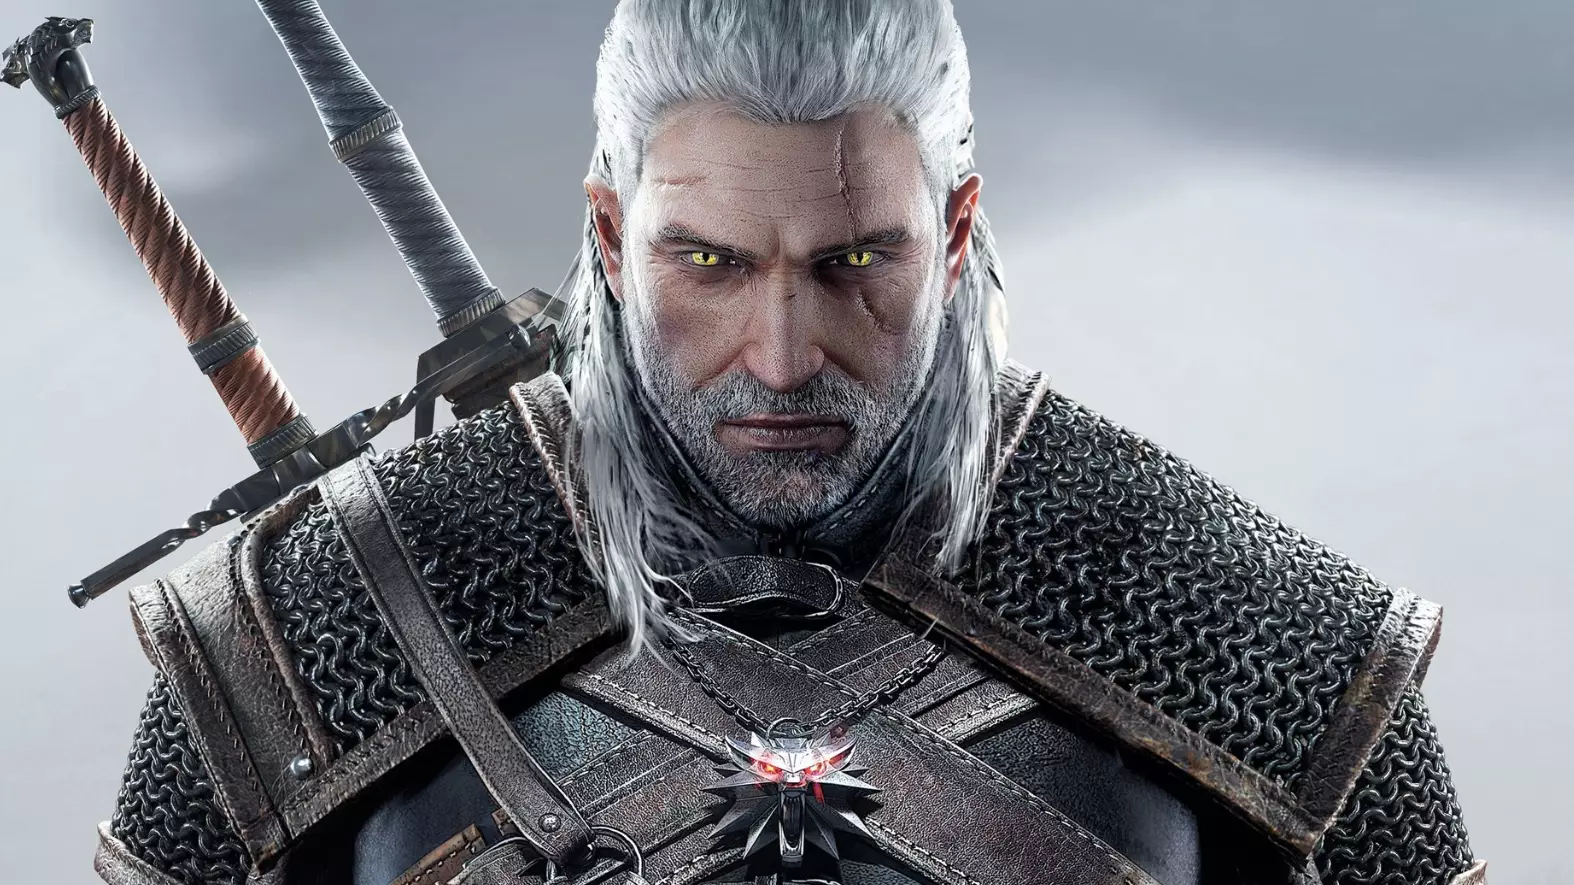 The Witcher Netflix Series Characters Have Been Revealed